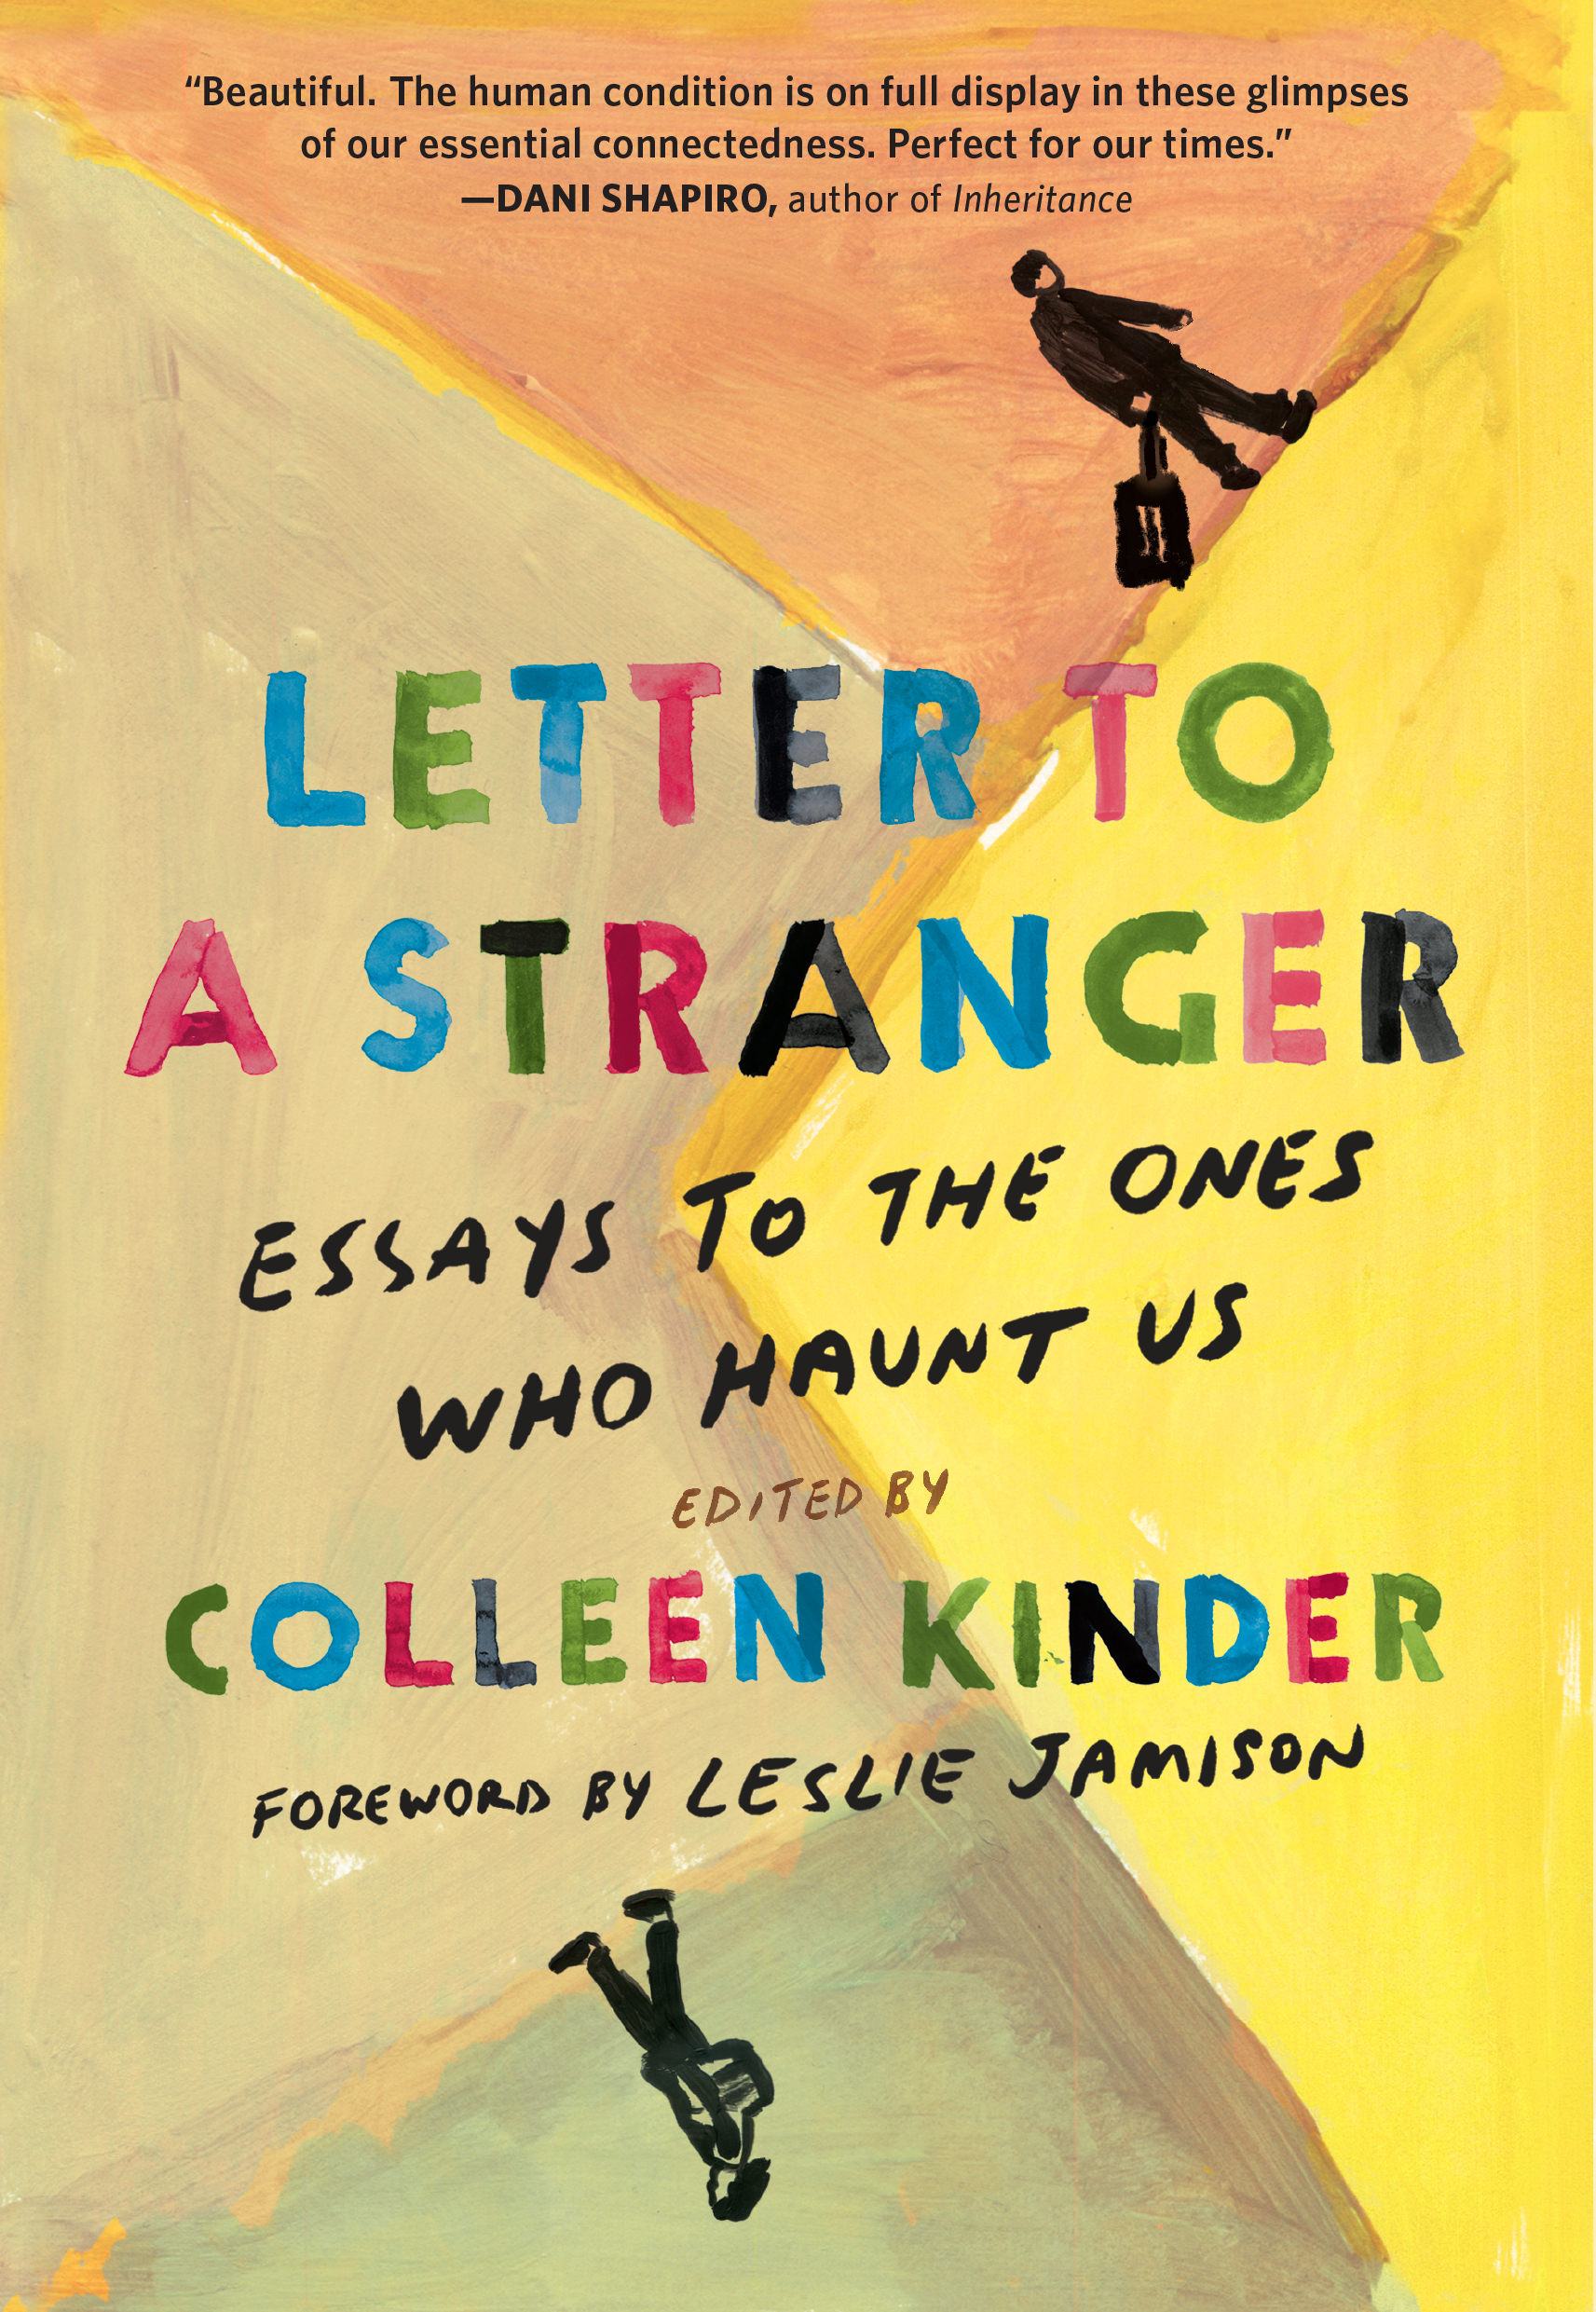 Letter to a Stranger by Colleen Kinder Hachette Book Group